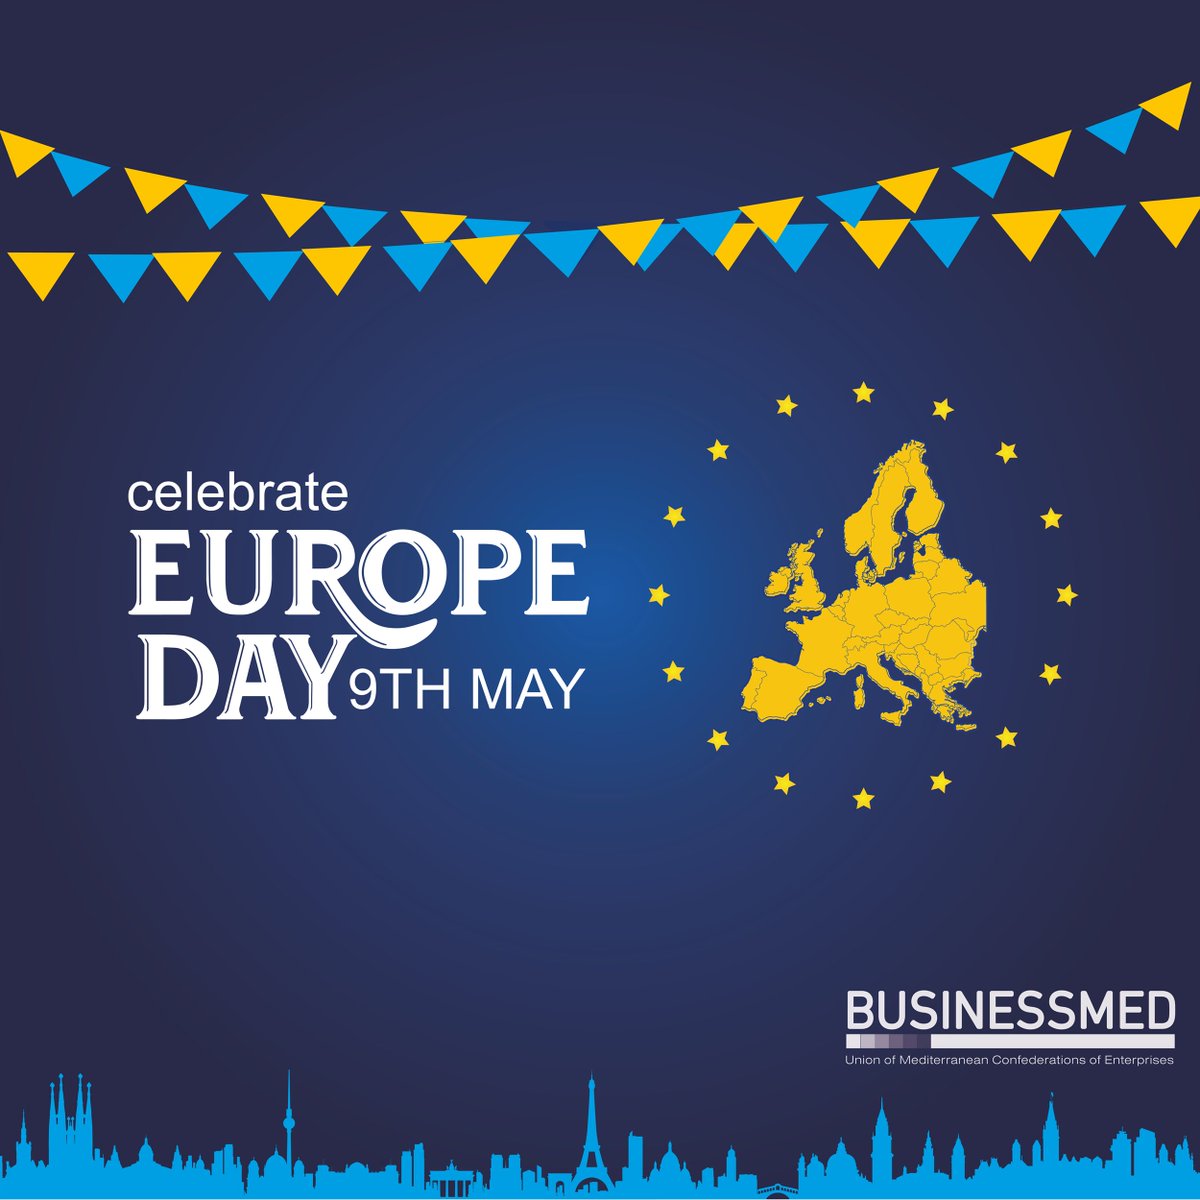 🎉 Happy #EuropeDay 🇪🇺

Let's celebrate the unity & peace among the countries of the 🇪🇺 #EuropeanUnion & beyond. 🙏A big thank you to all our EU members & partners for their trust. Together, let's support #RegionalDevelopment & strengthen economic & cultural ties. Best wishes✨